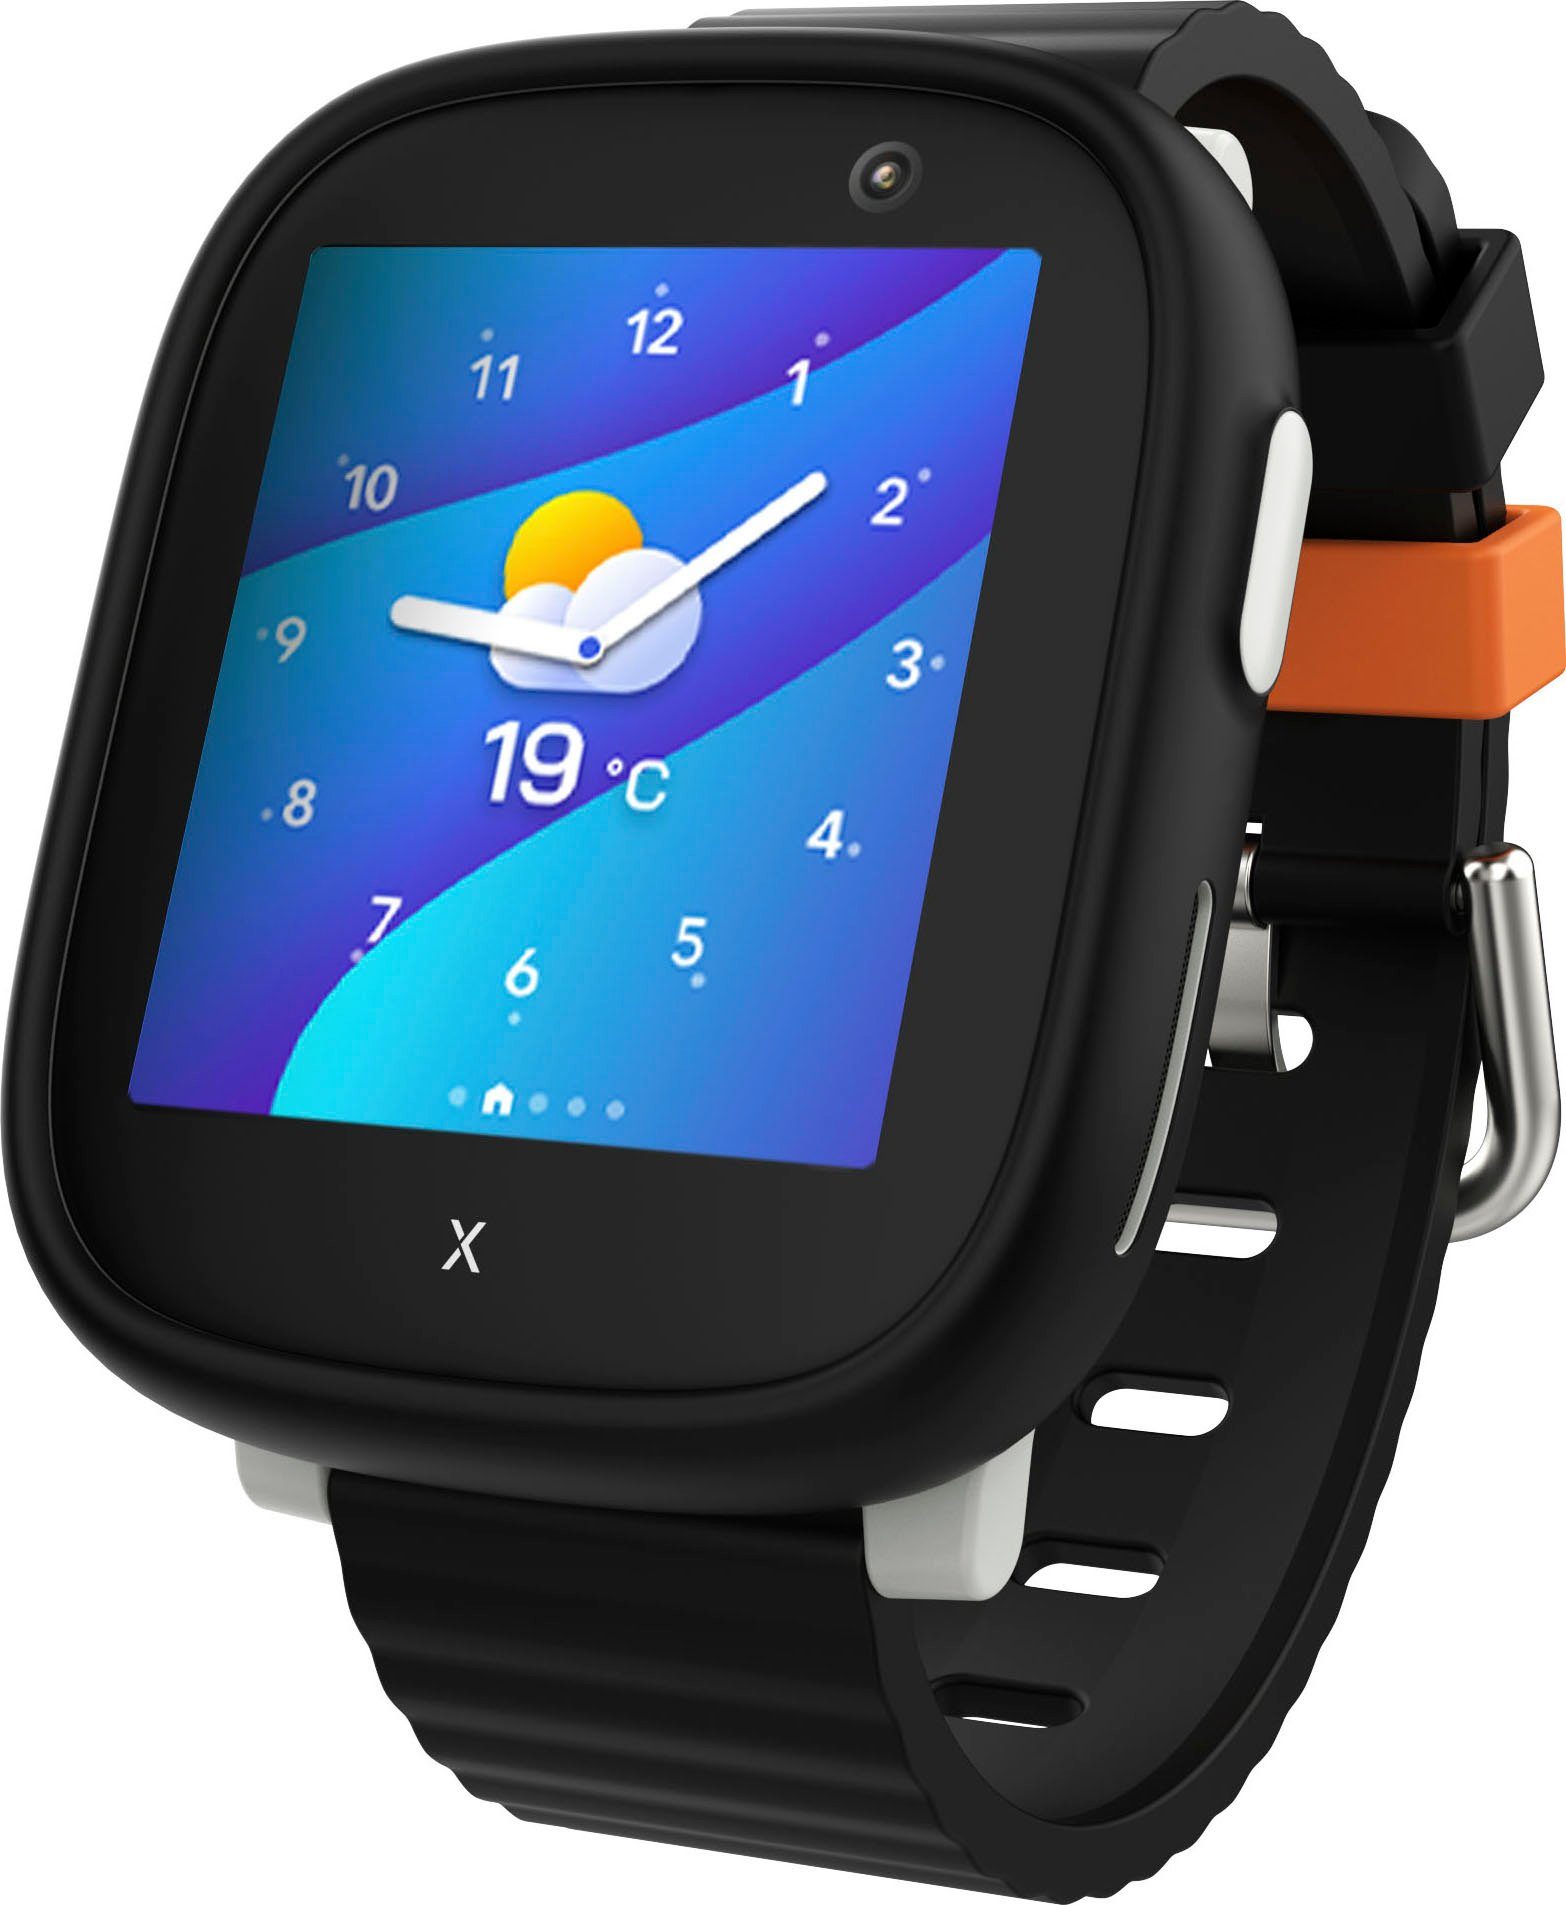 cm/1,52 X6Play Wear), Smartwatch Karte (3,86 Android Zoll, Sim inkl. Connect Kinder Xplora